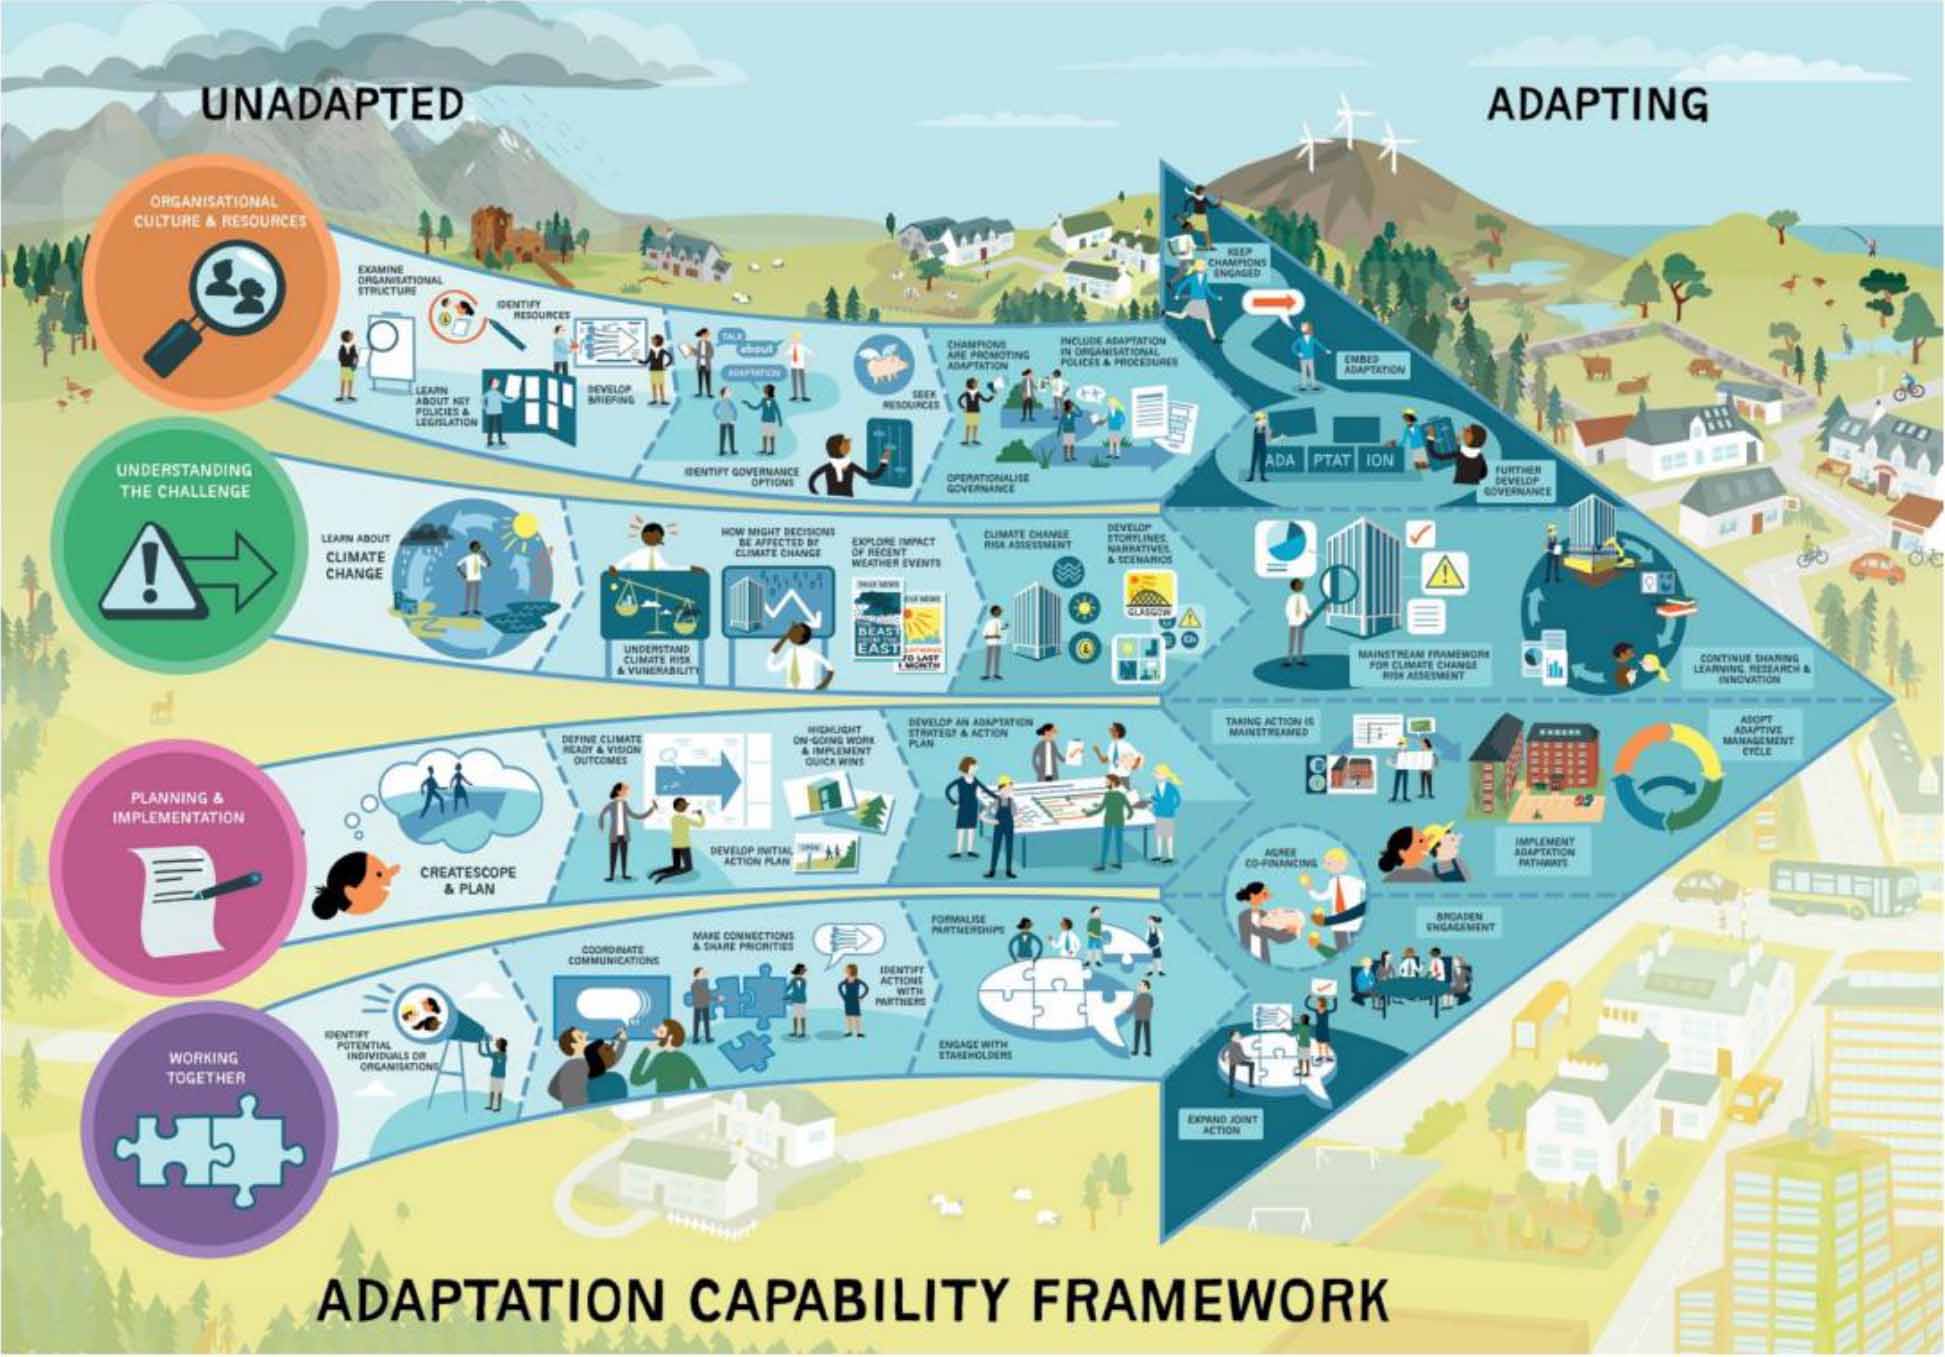 The framework illustrates how four threads, organisational culture and resources, understanding the challenge, planning and implementation and working together, all contribute towards the move from unadapted to places which are adapting to climate change.